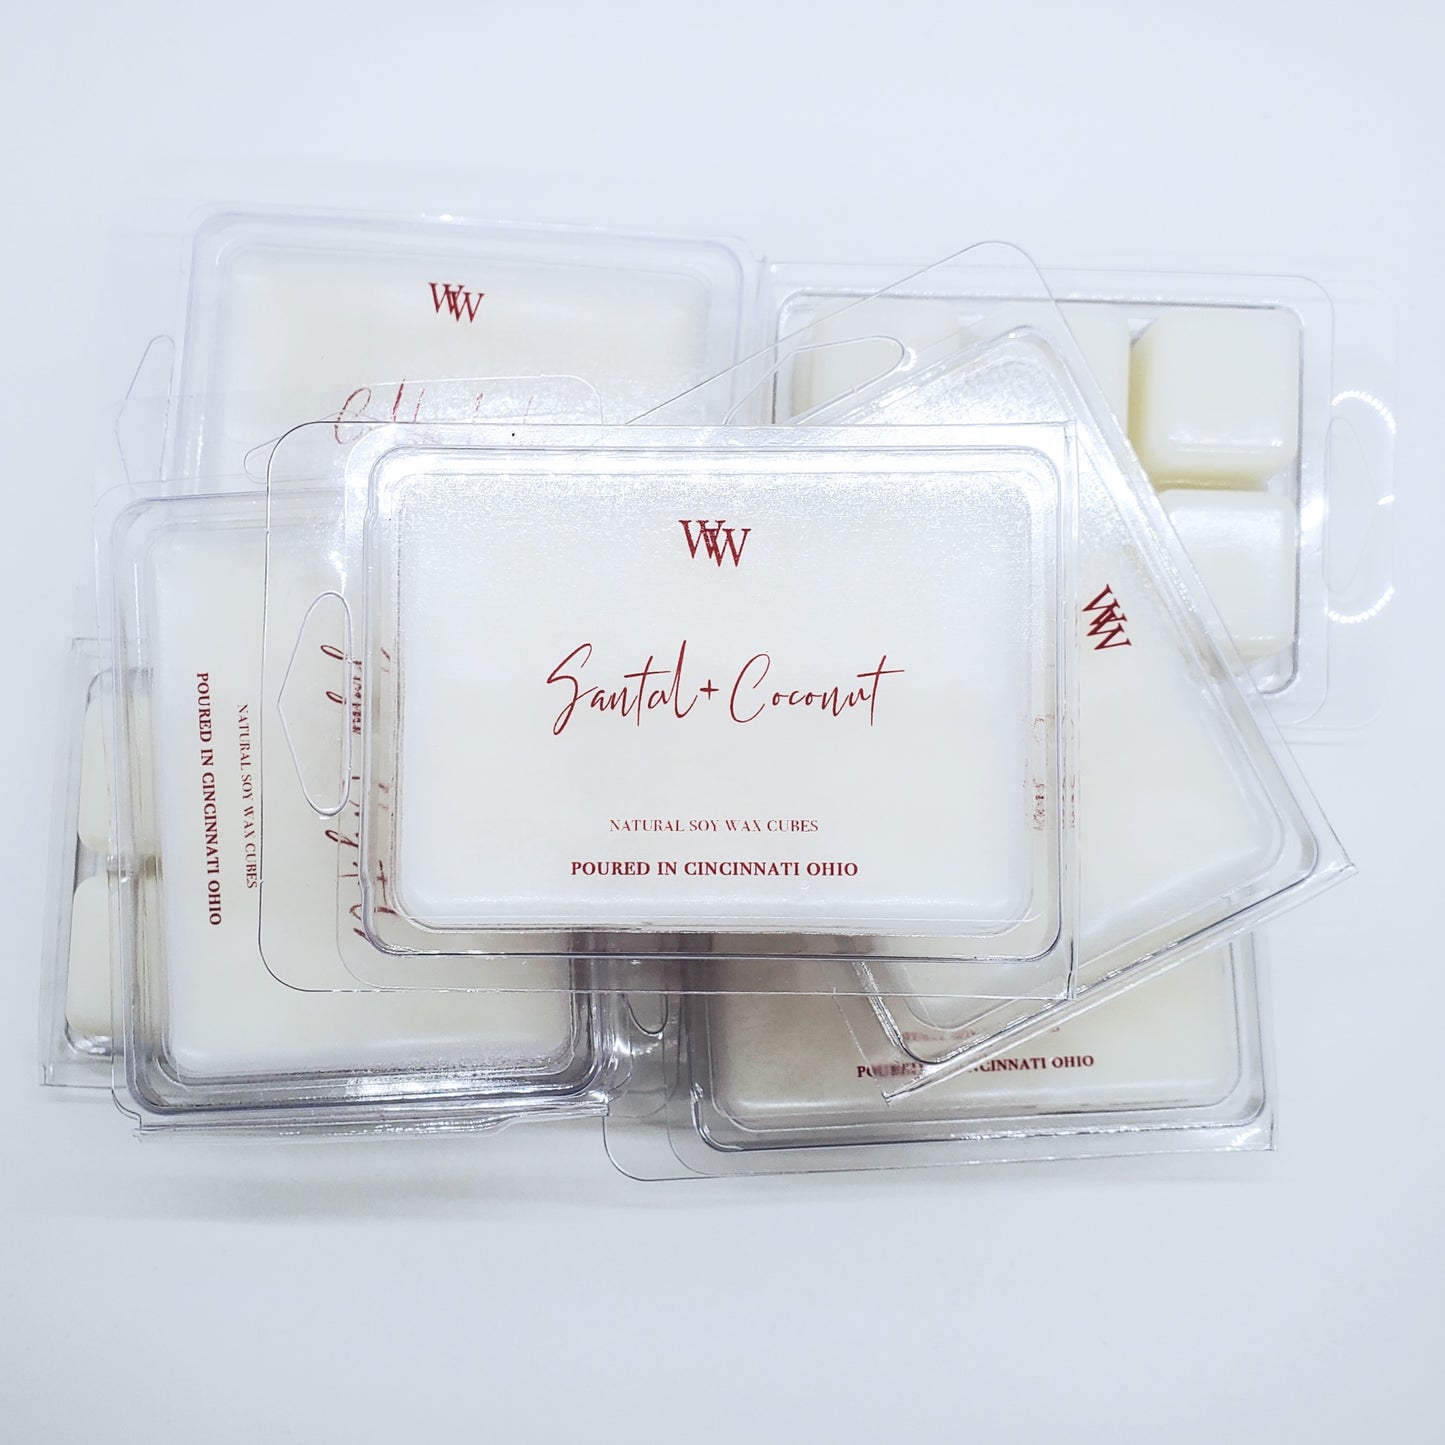 White Tea Highly Scented Soy Wax Melts